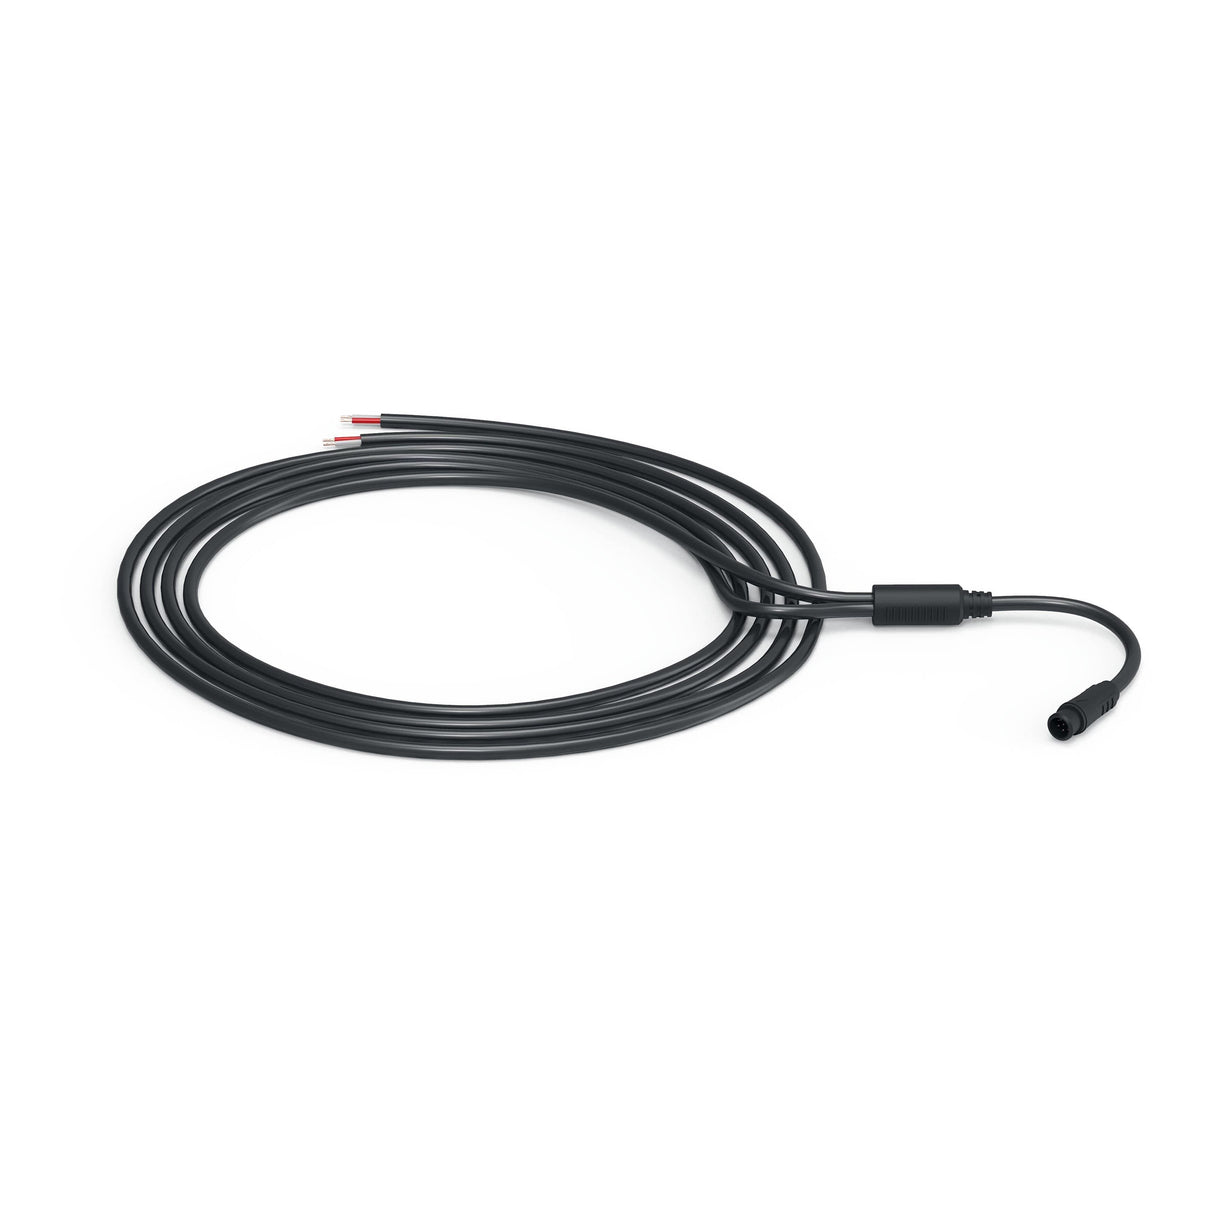 Mahle X20 Light Wire: